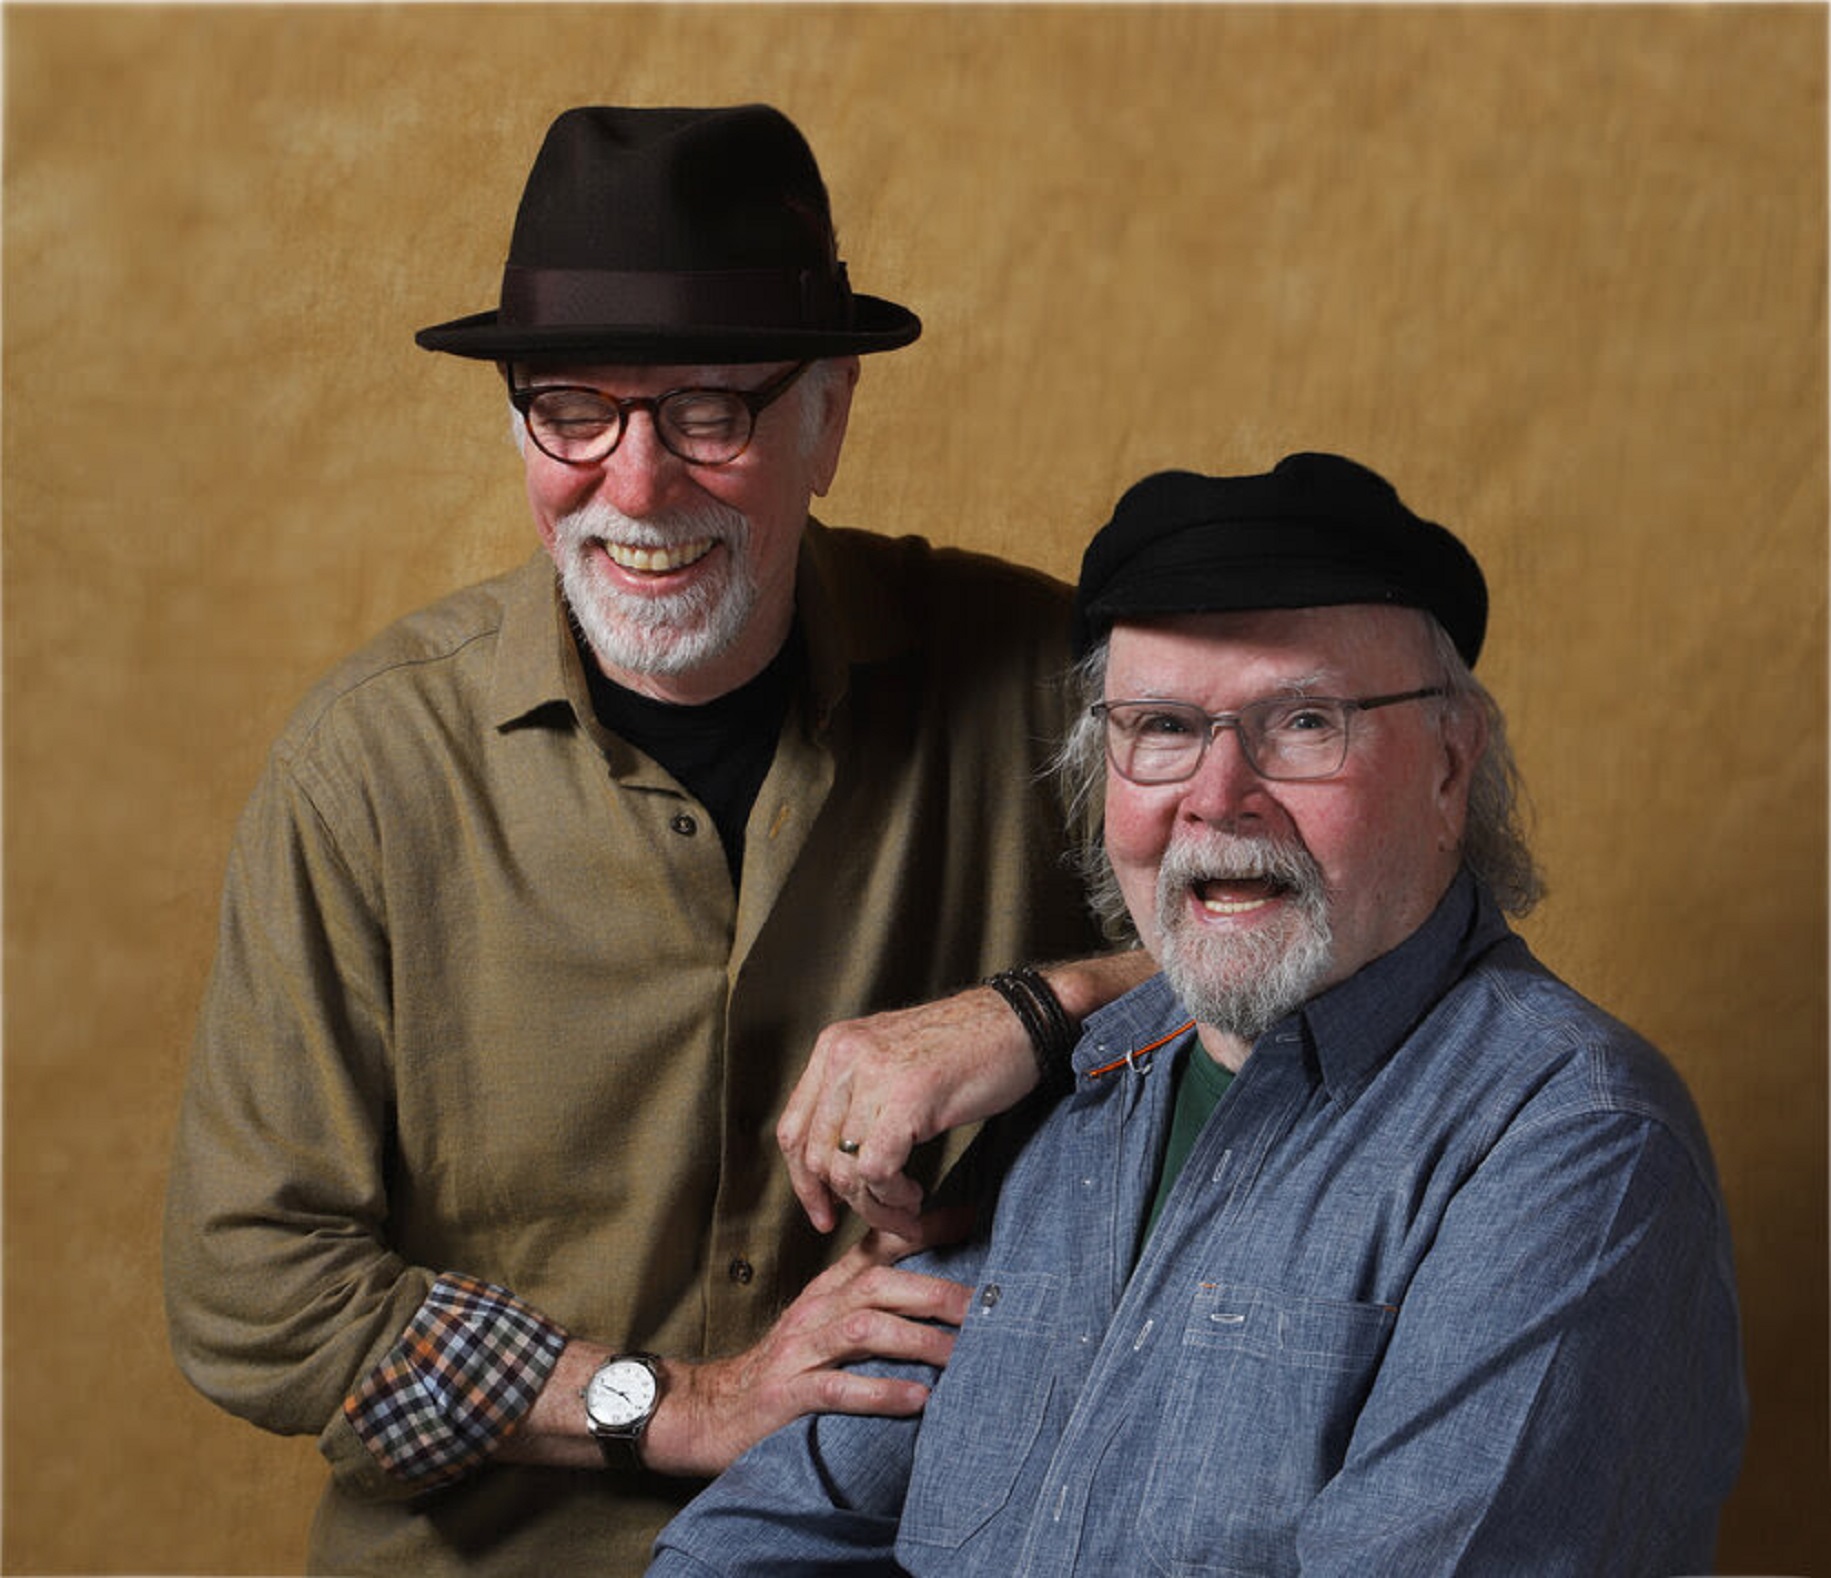  JOHN McCUTCHEON AND TOM PAXTON JOIN FORCES TO CREATE THEIR FIRST JOINT RECORDING TITLED TOGETHER DUE OUT ON 10/13/23